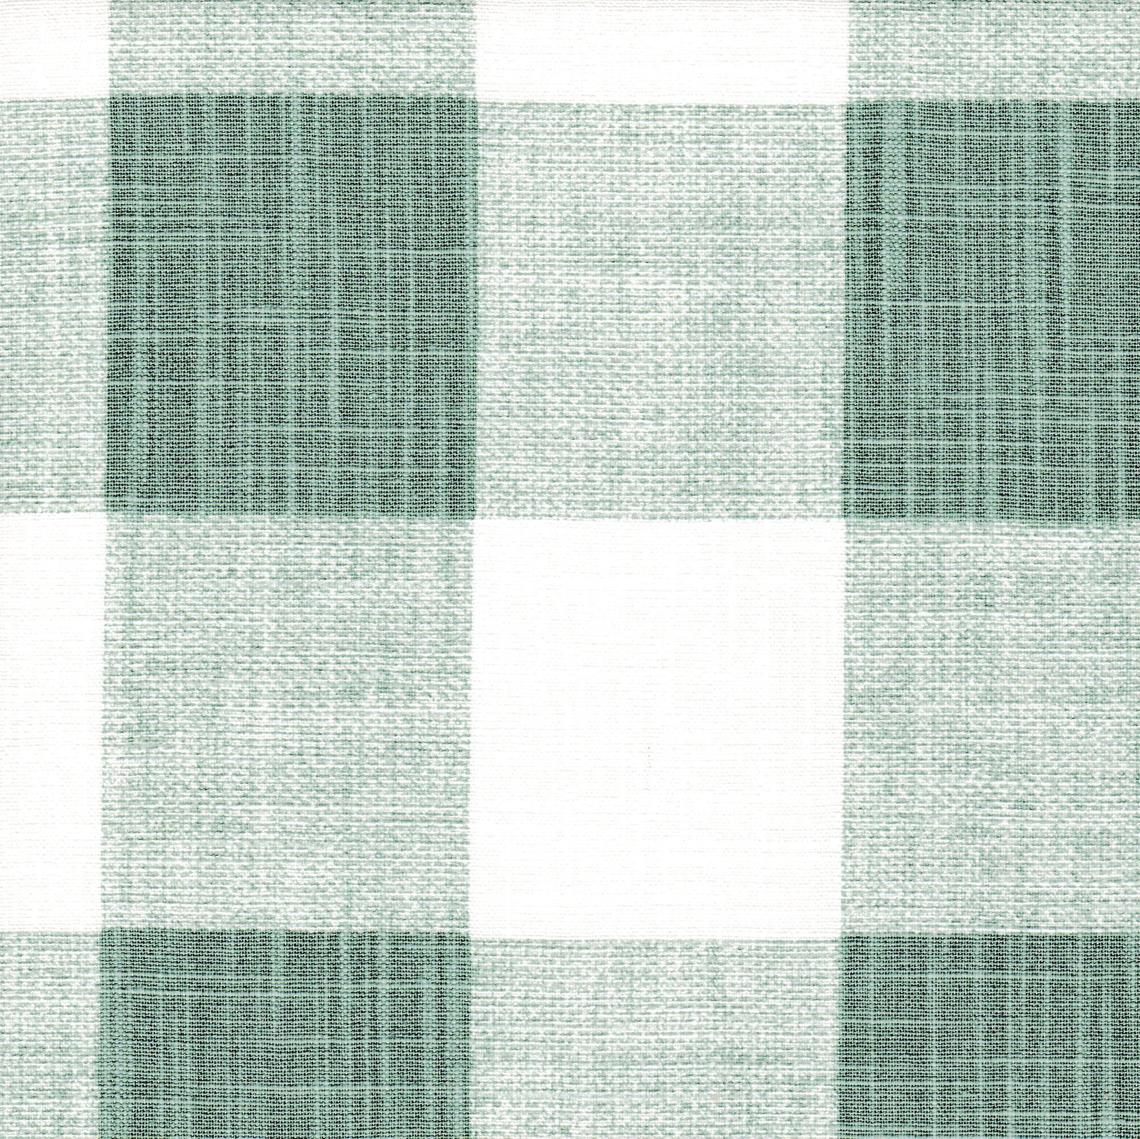 tailored bedskirt in anderson waterbury spa green buffalo check plaid